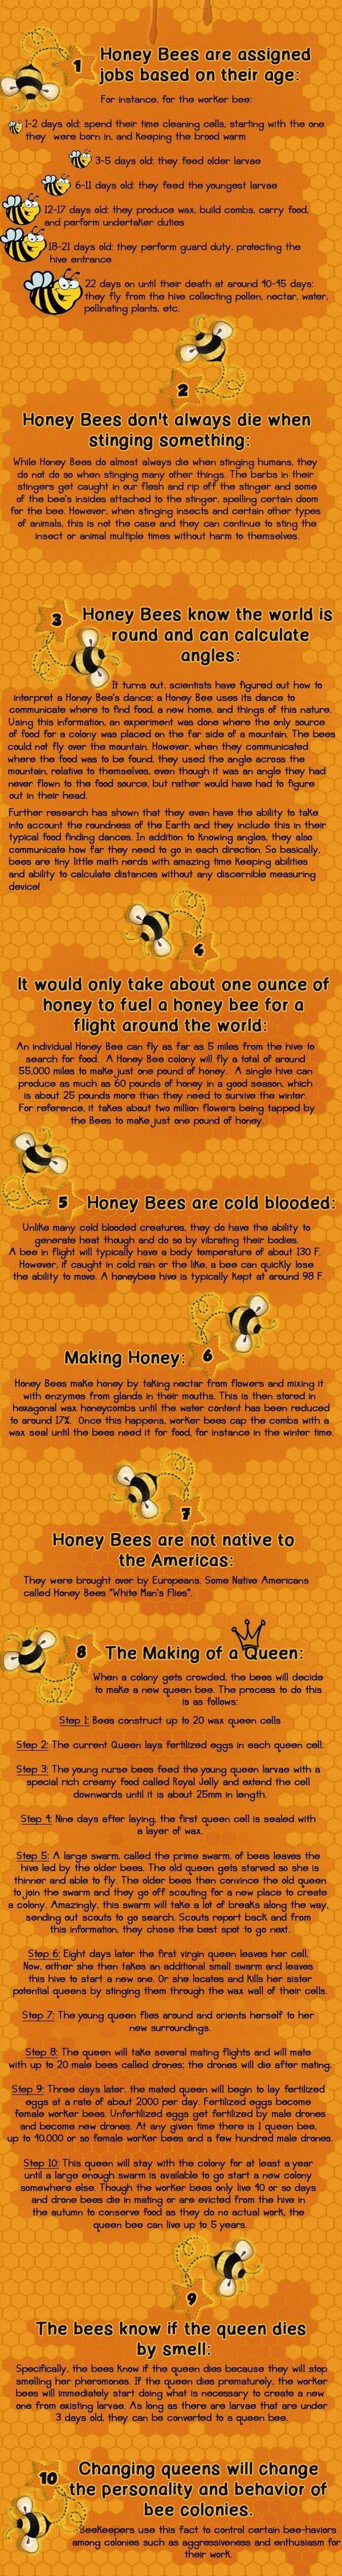 Interesting Facts About Honey Bees (infographic)